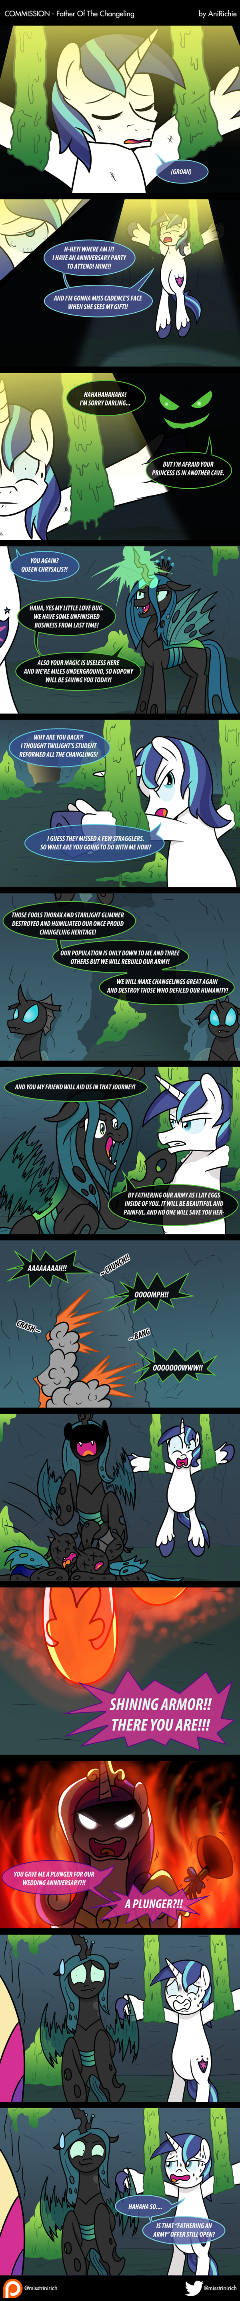 COM - Father Of The Changeling (COMIC)